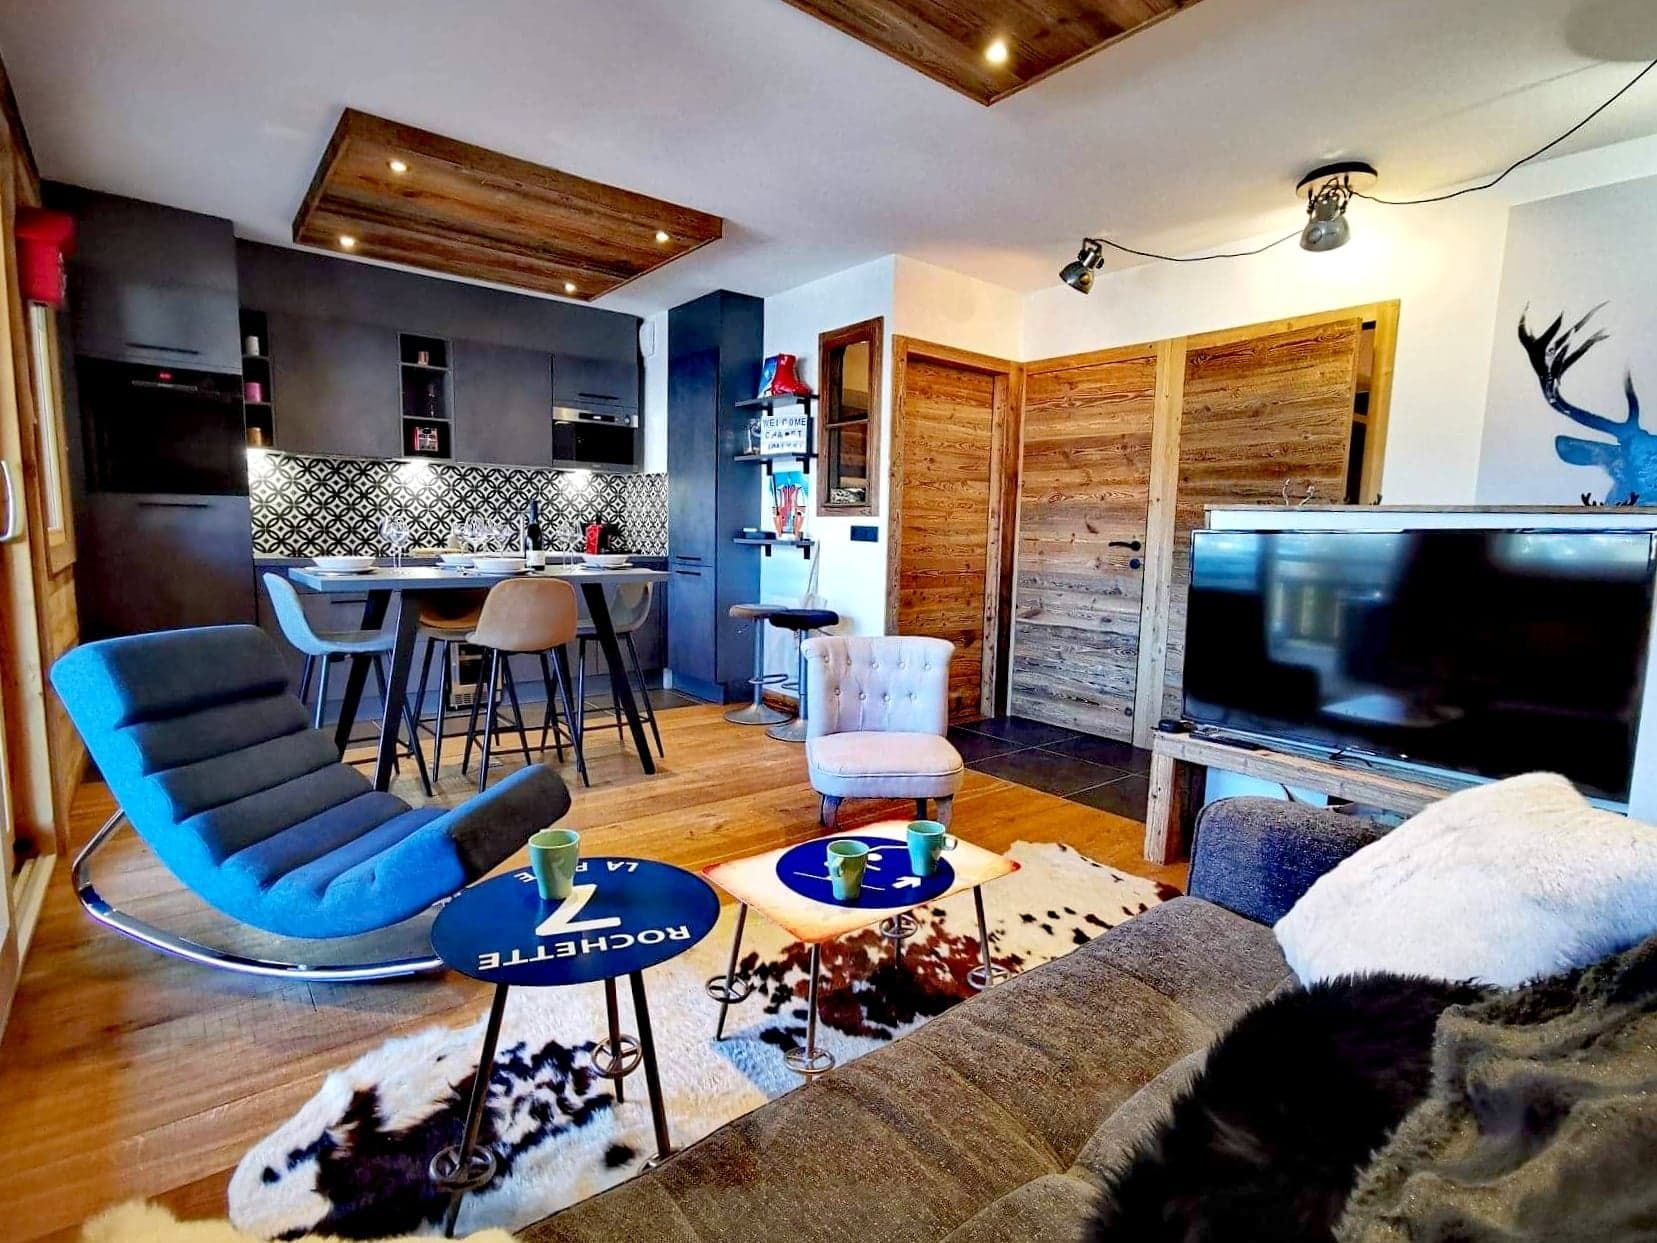 2 bed Apartment For Sale in Praz de Lys Sommand, French Alps